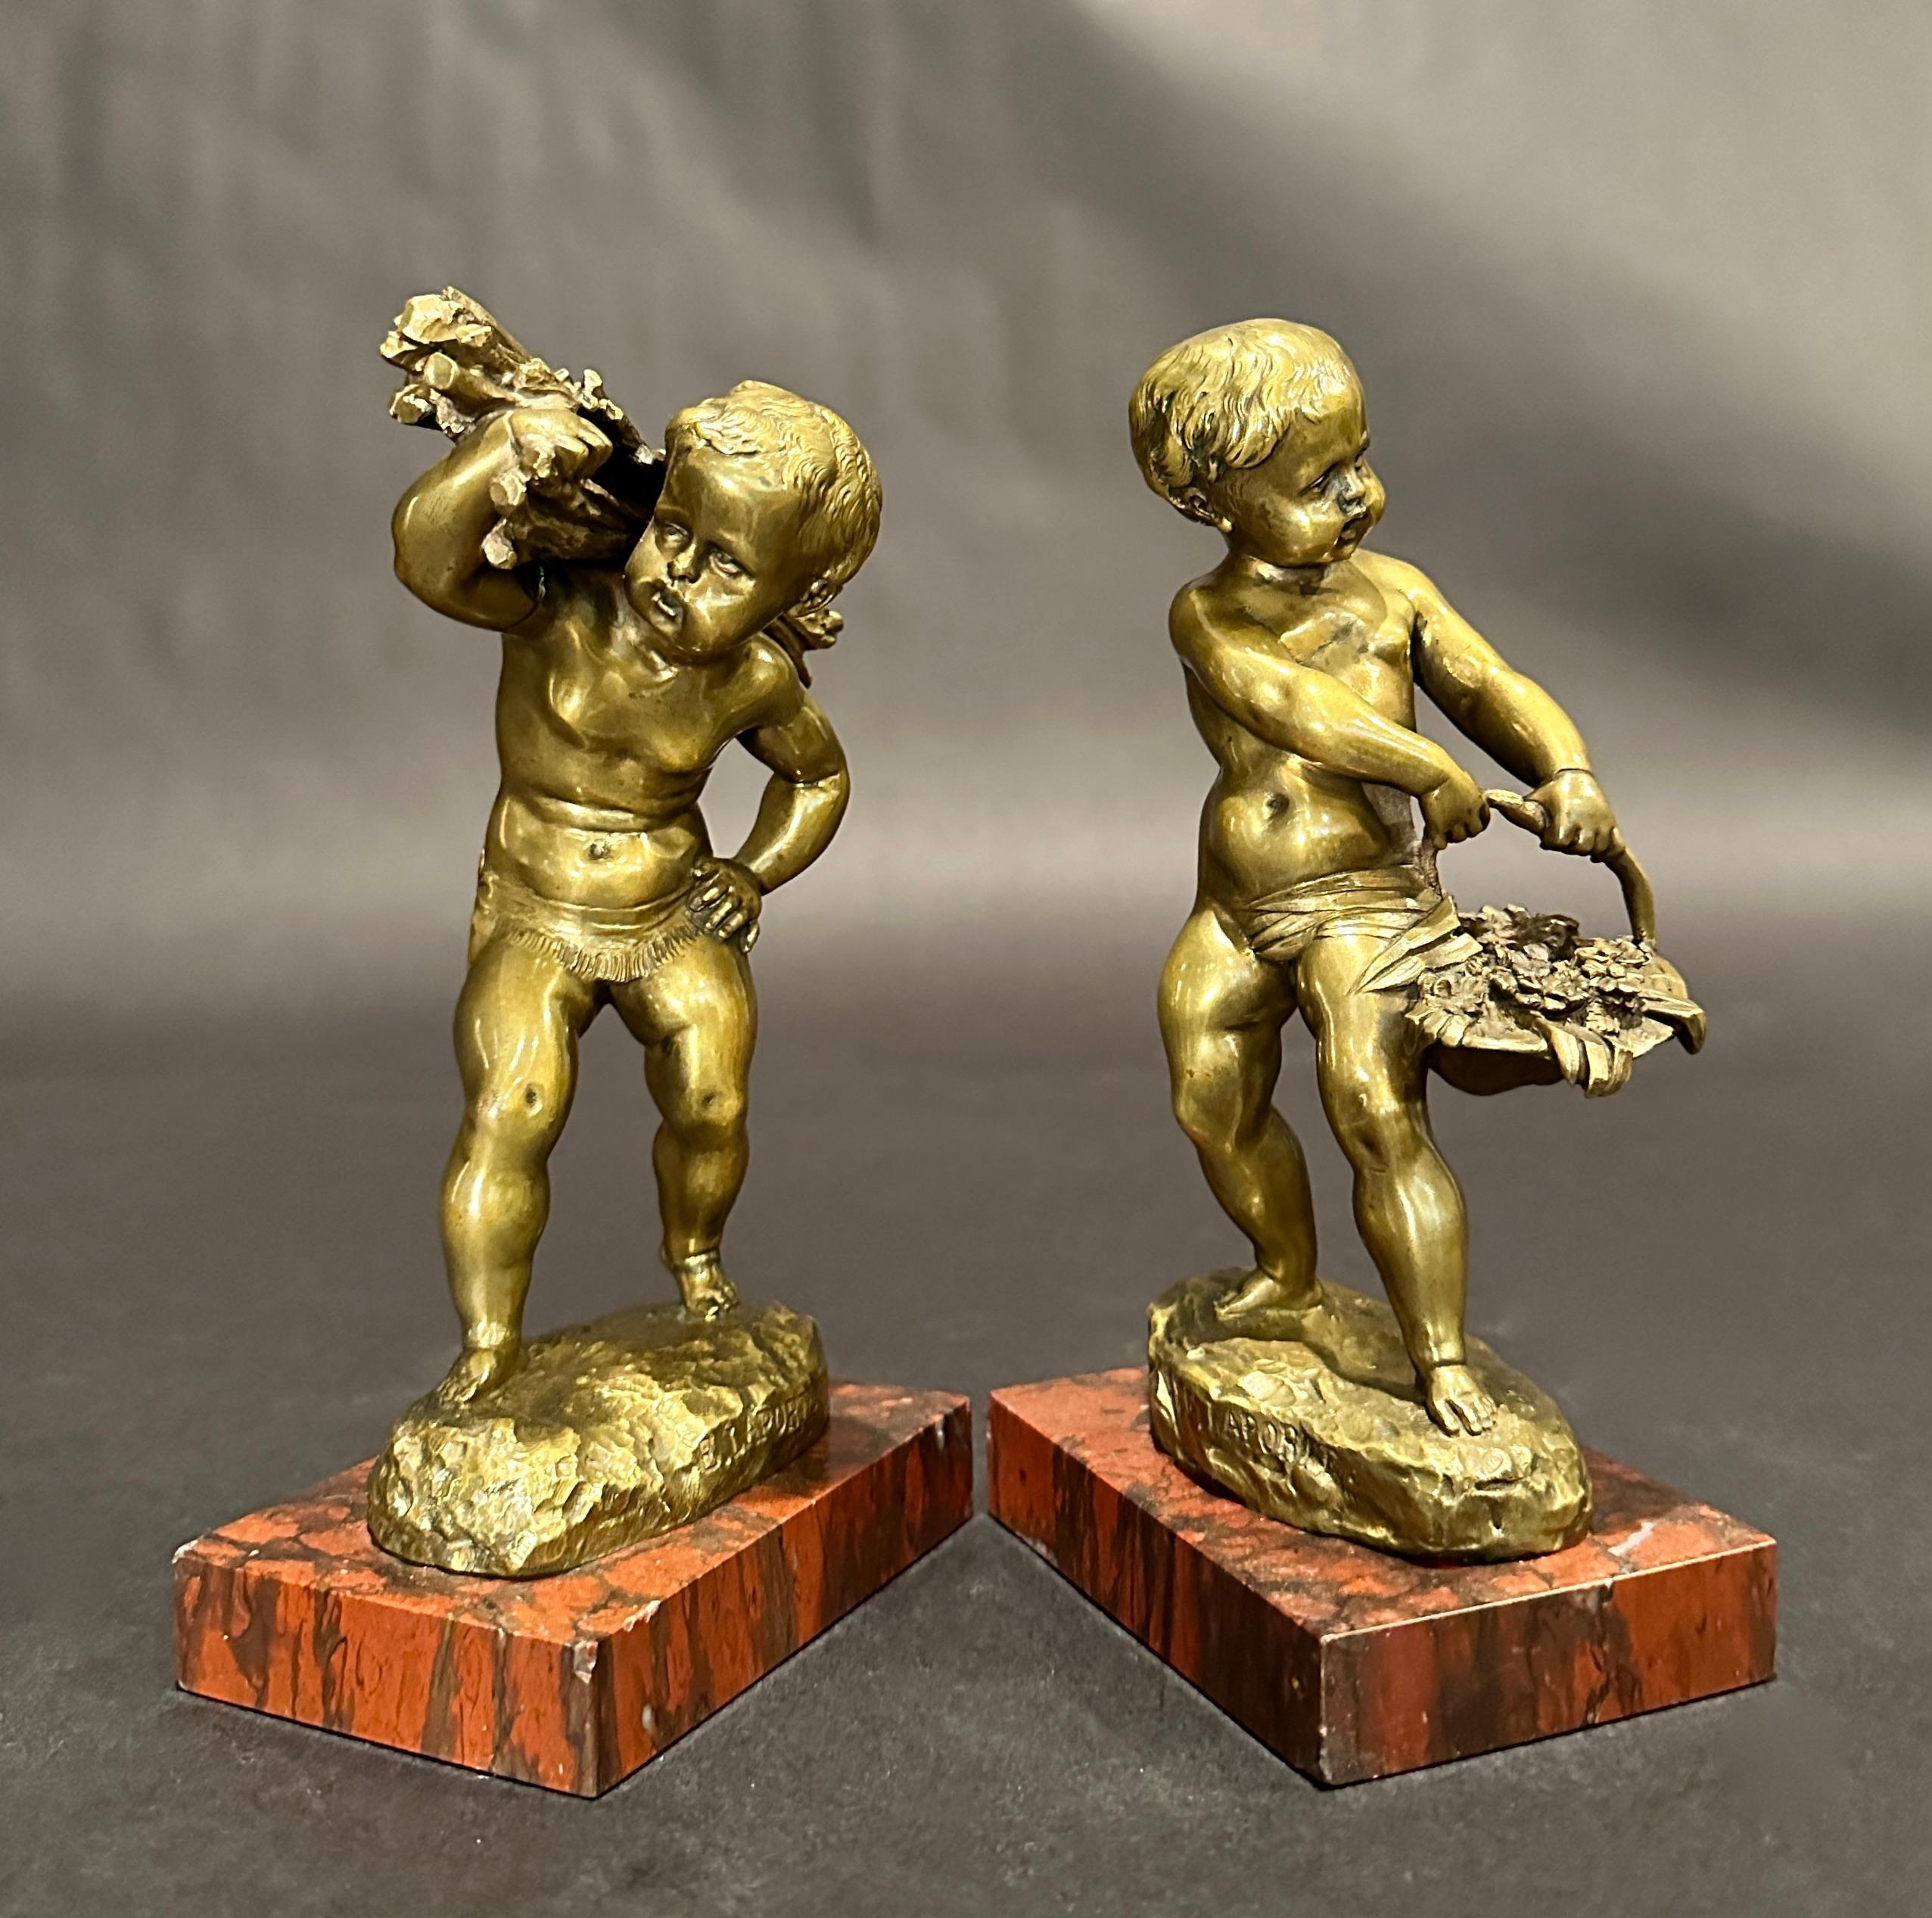 19th century French bronze sculptures of young farm boys by Emile Laporte (1858 - 1907), France. One boy carrying a basket of flowers, the other a bundle of sticks. Signed, mounted on rouge marble bases.